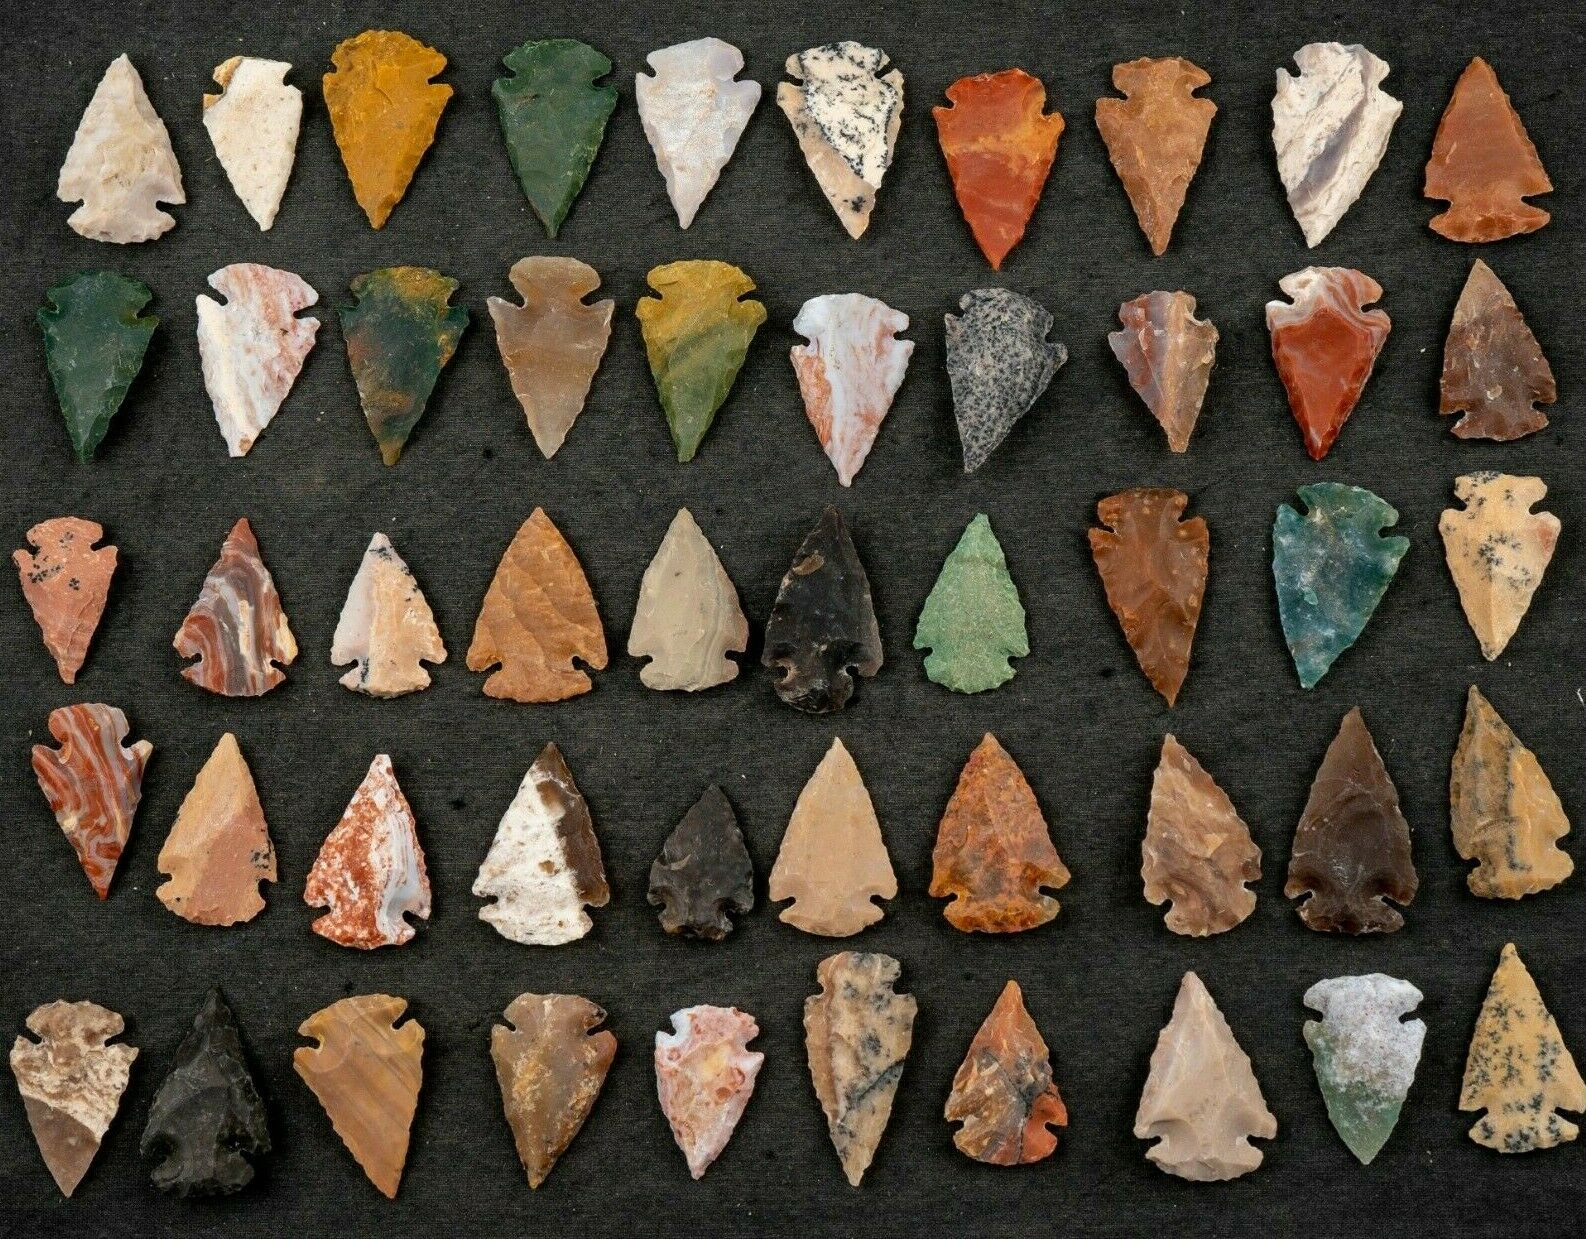 *** 50 Pc Lot Flint Arrowhead Oh Collection Project Spear Points Knife Blade ***